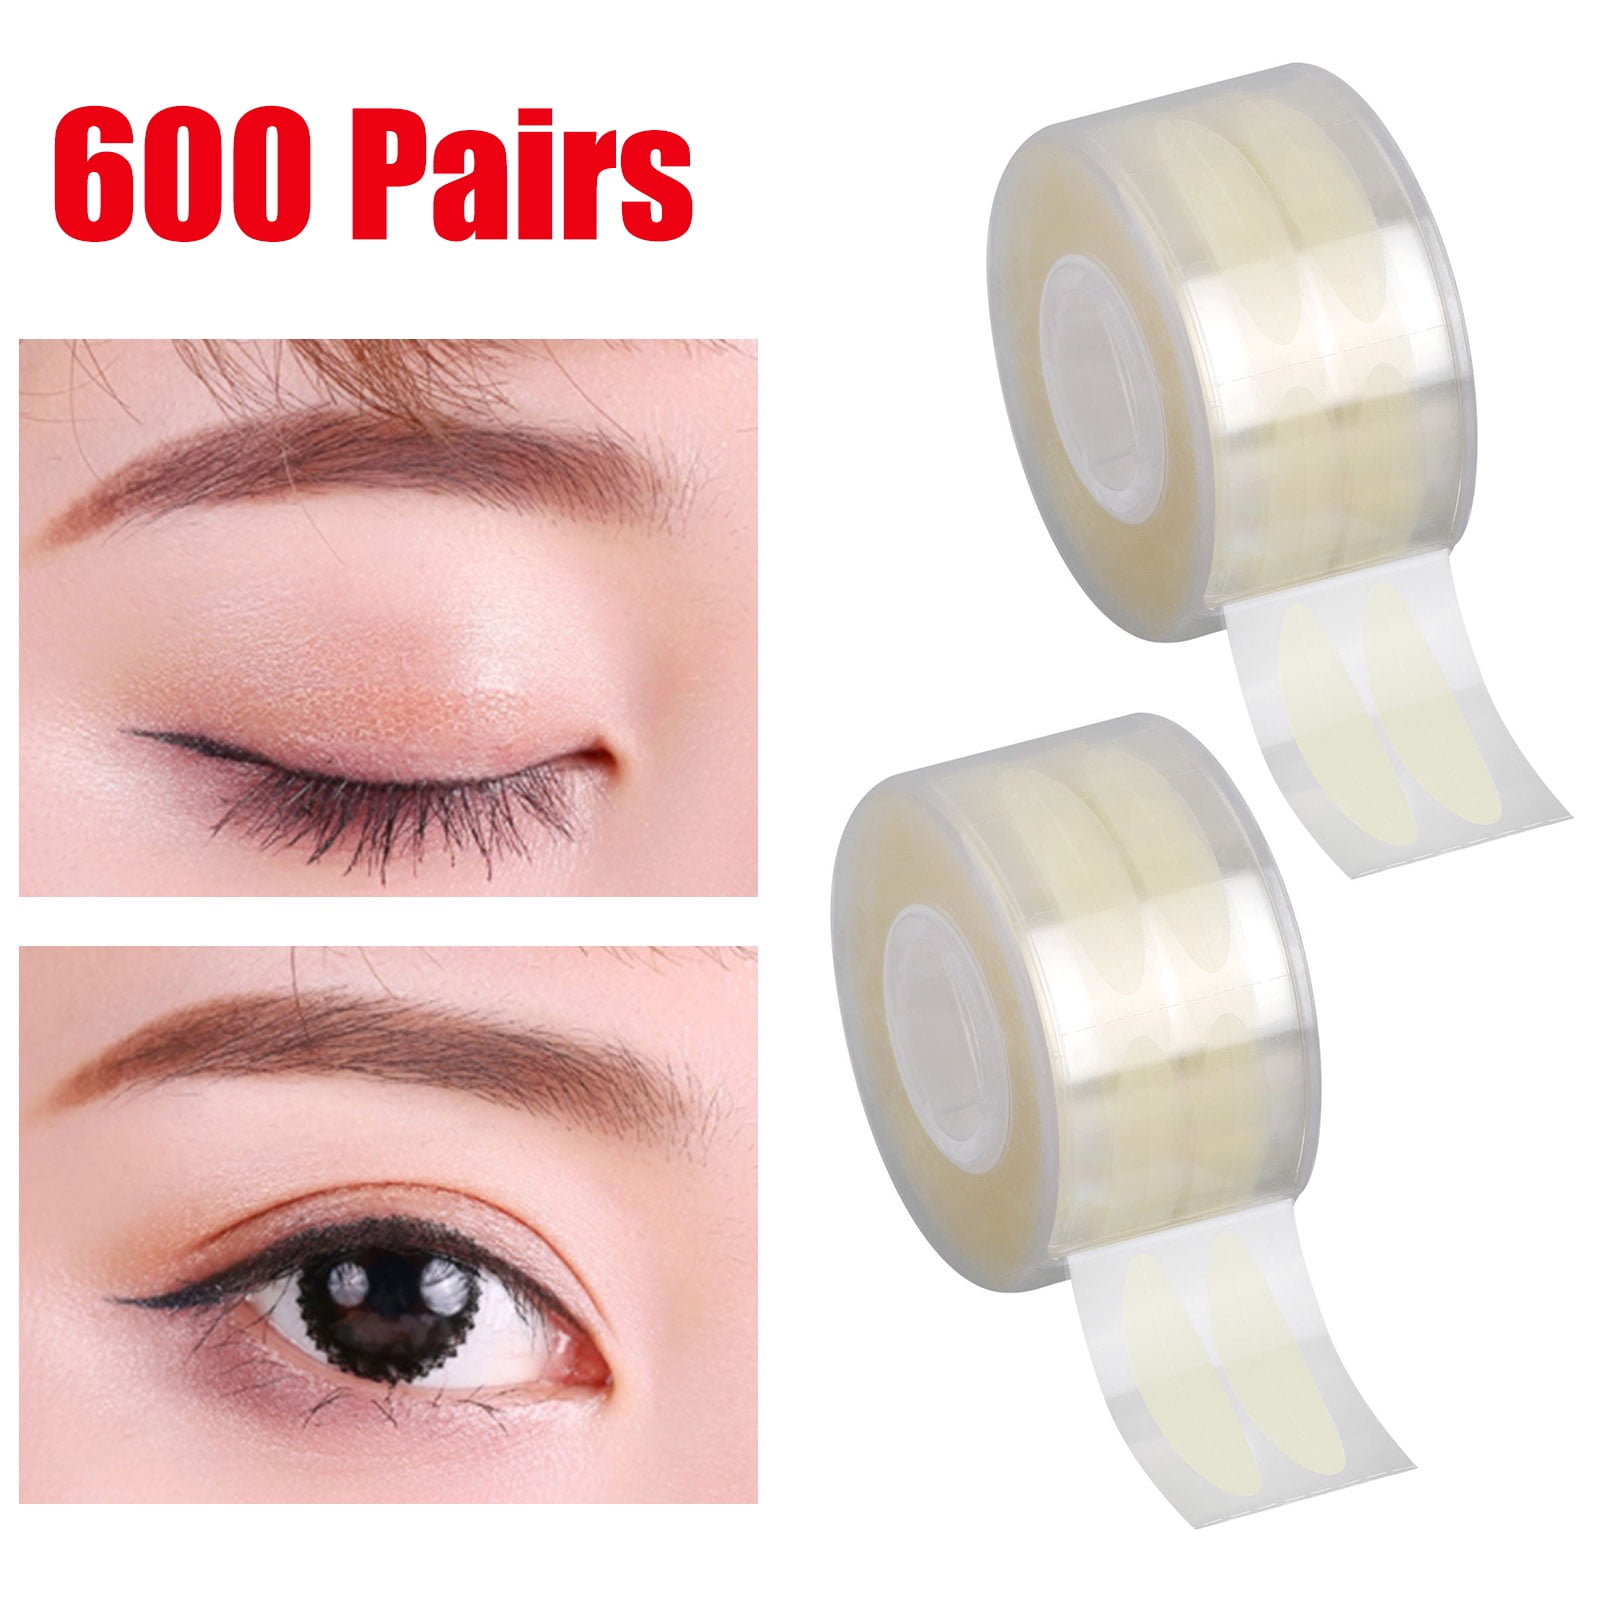 Double Eyelid Tape Invisible Adhesive Eye Lift Strips Makeup Lace Sticker  360pcs